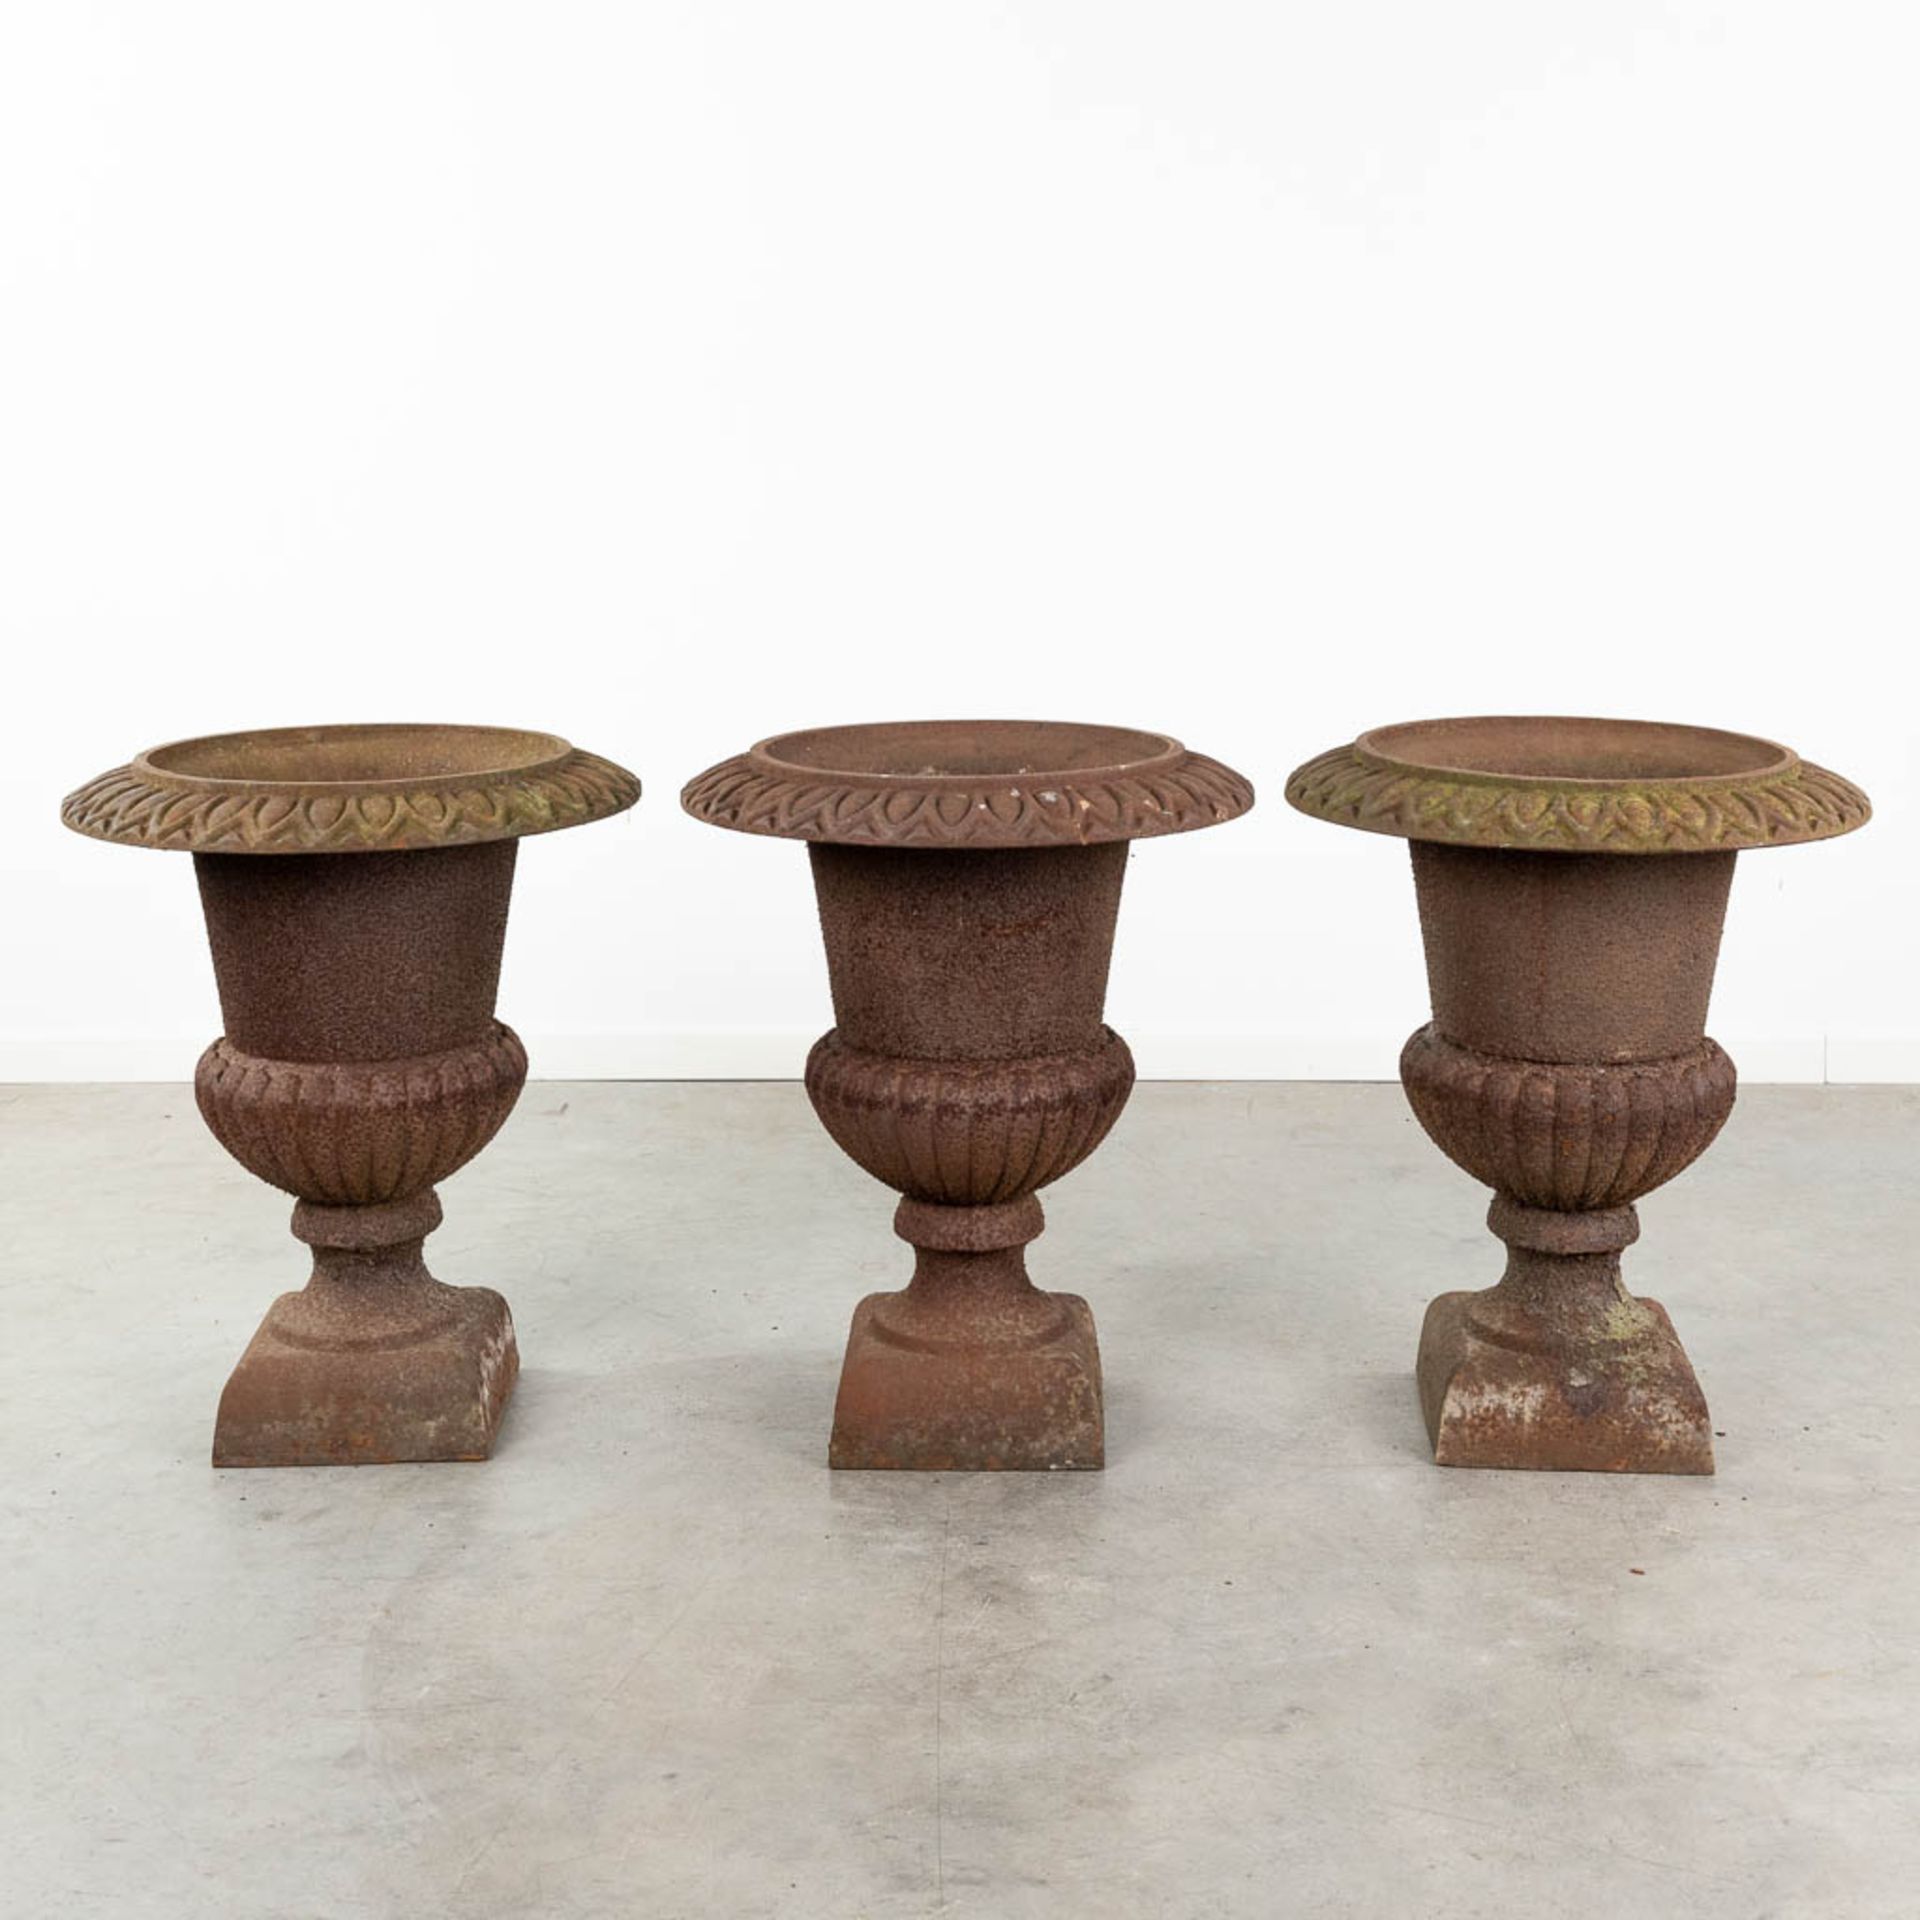 A collection of 3 large garden vases made of cast iron. (H: 67 x D: 55 cm)